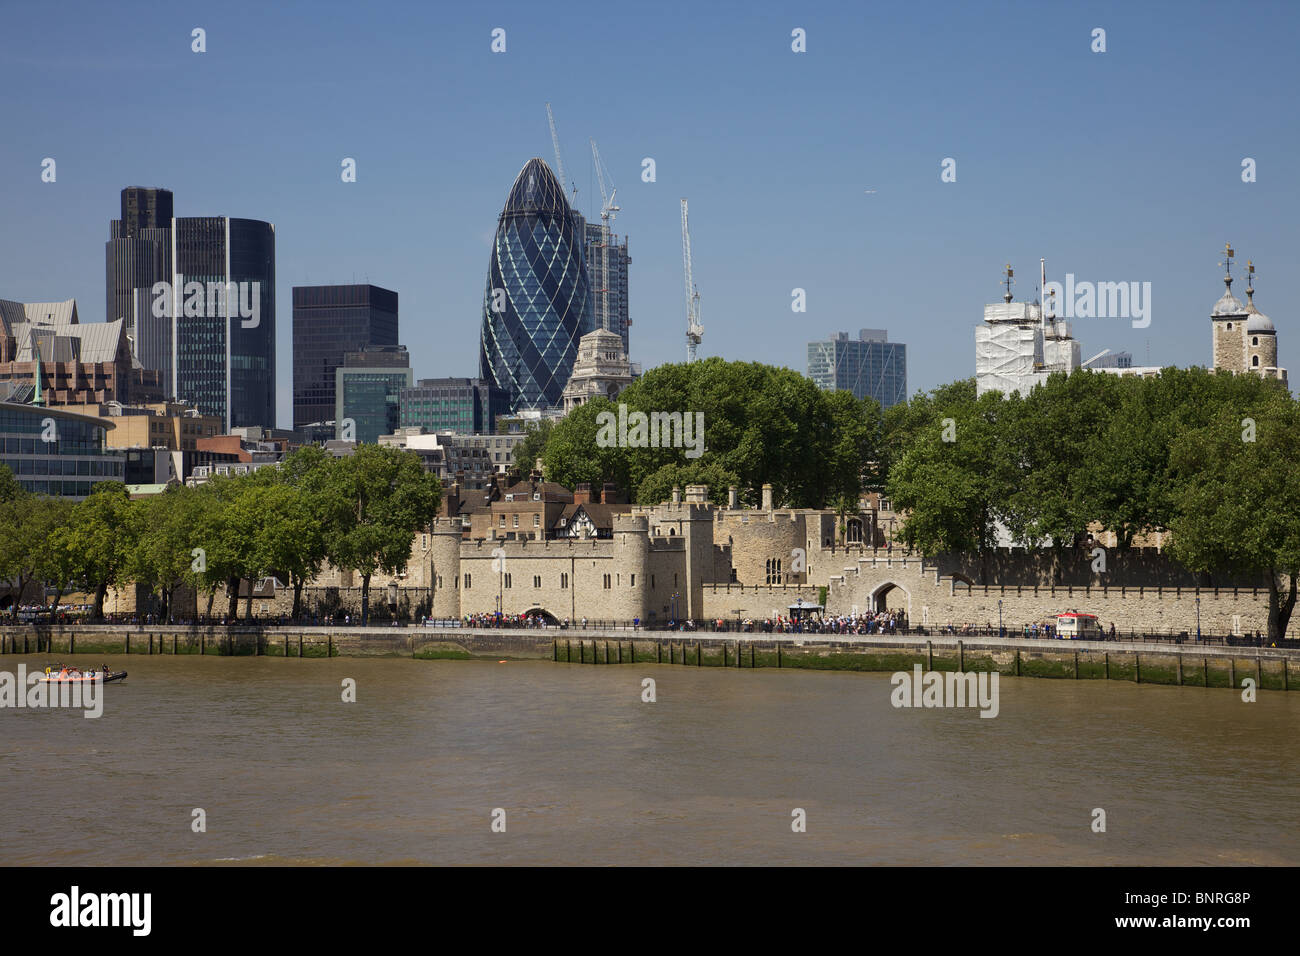 The city of London skyline with the Tower of London and the river Thames foreground. Stock Photo